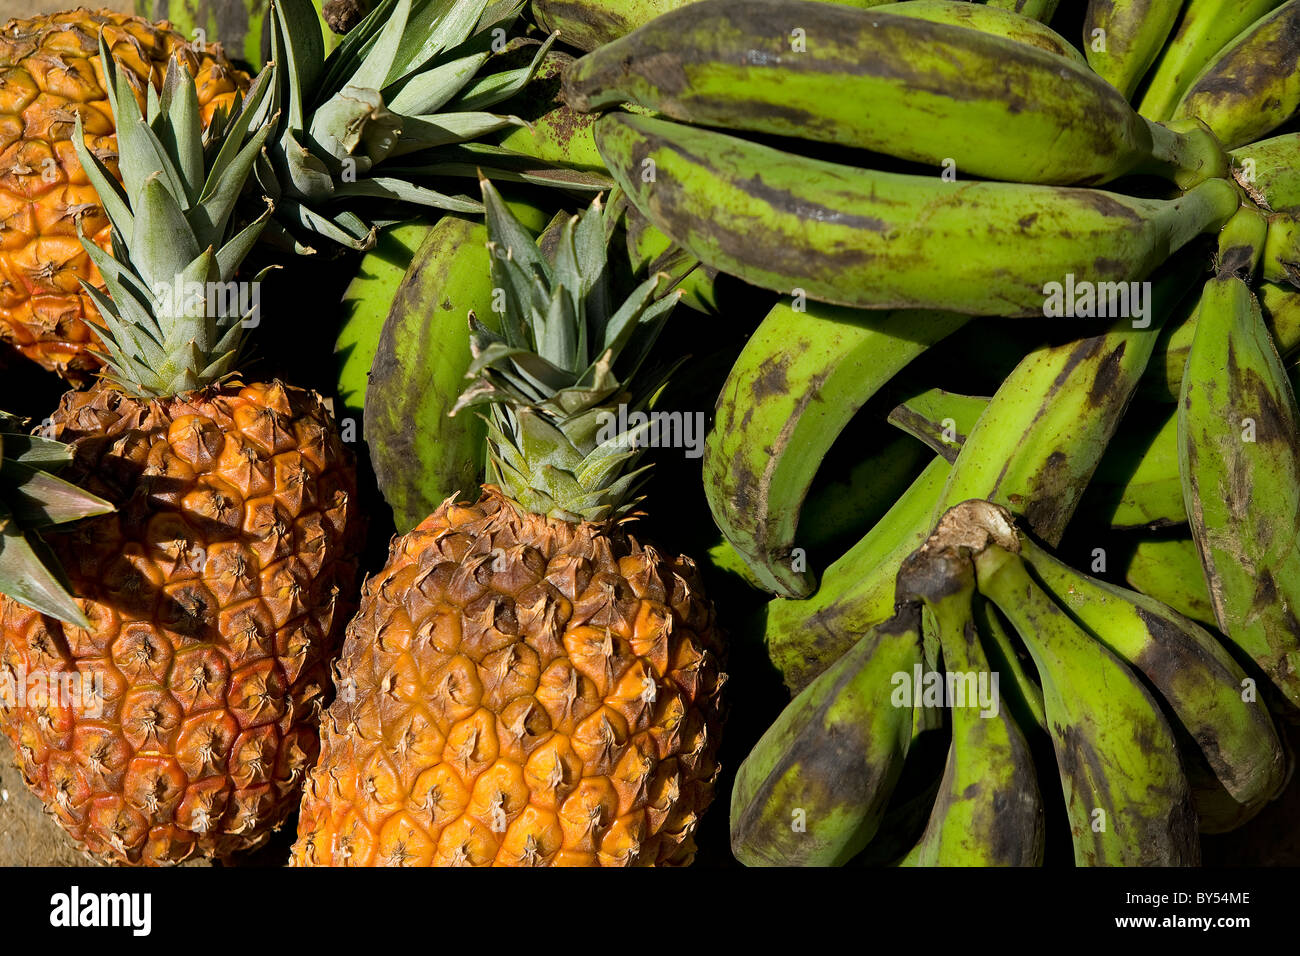 Close-up of fresh pineapple and plantains, Bogota, Colombia Stock Photo